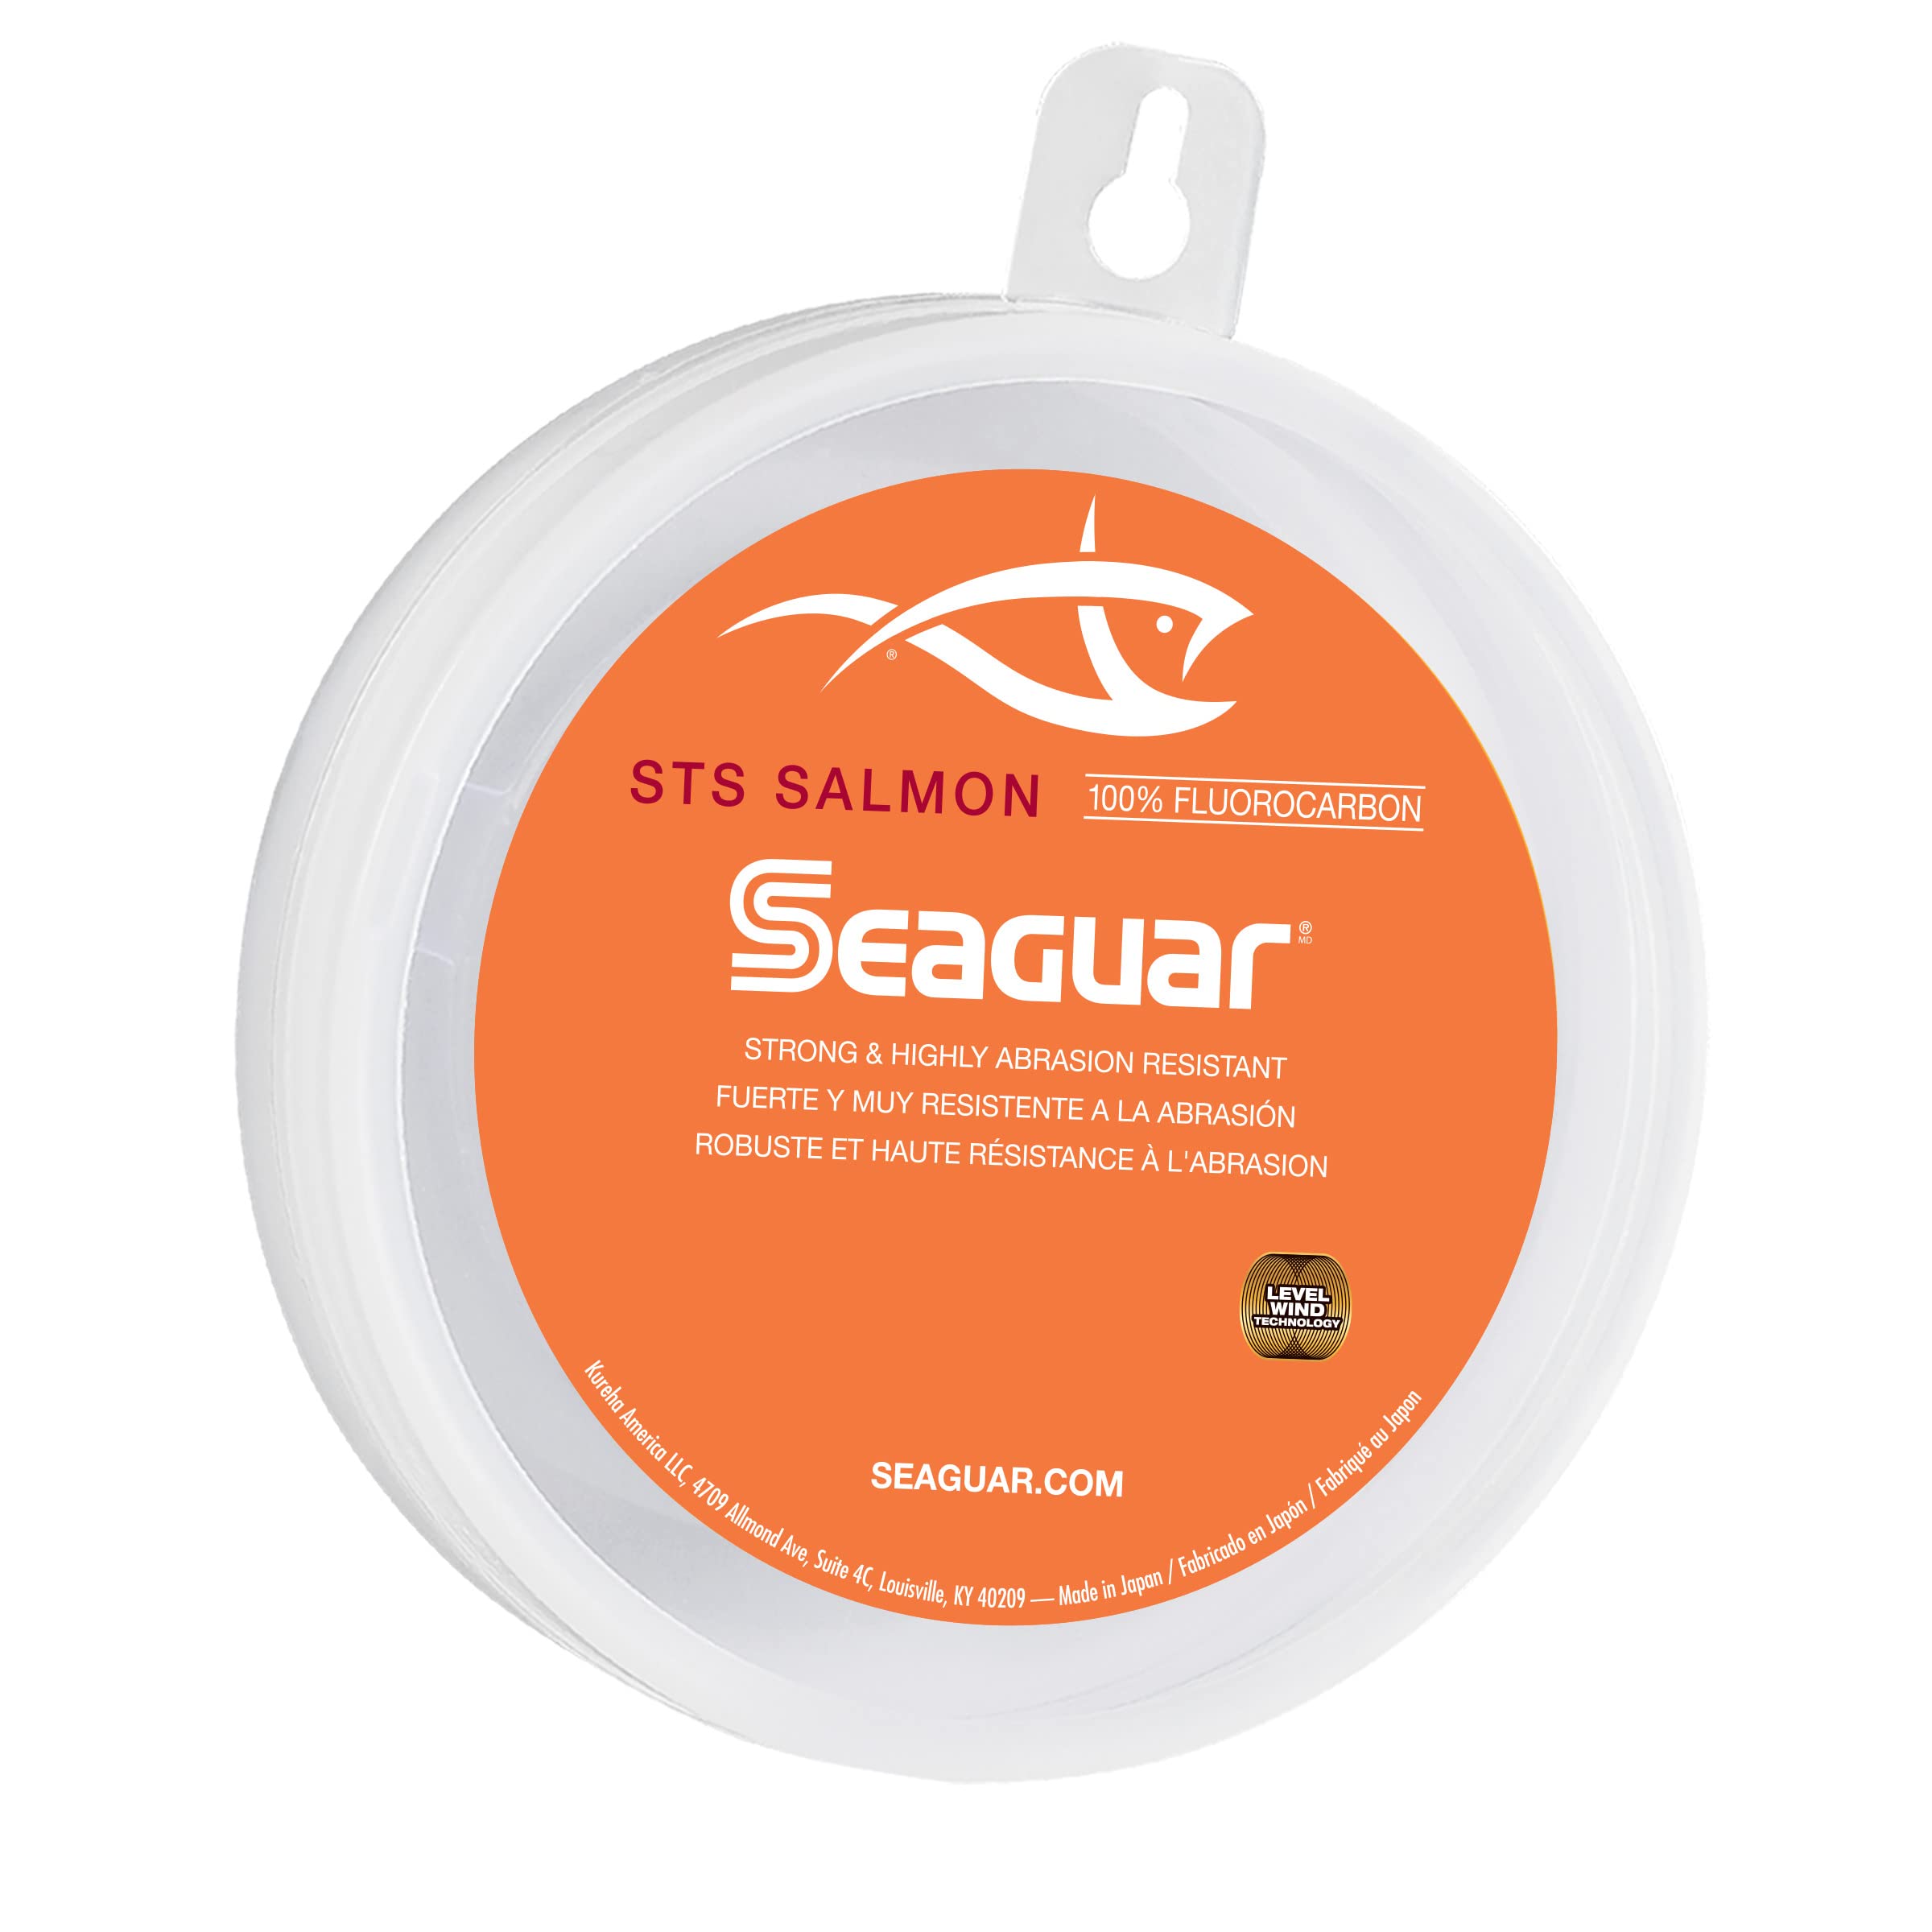 Seaguar STS Salmon Fishing Line, Strong and Abrasion Resistant